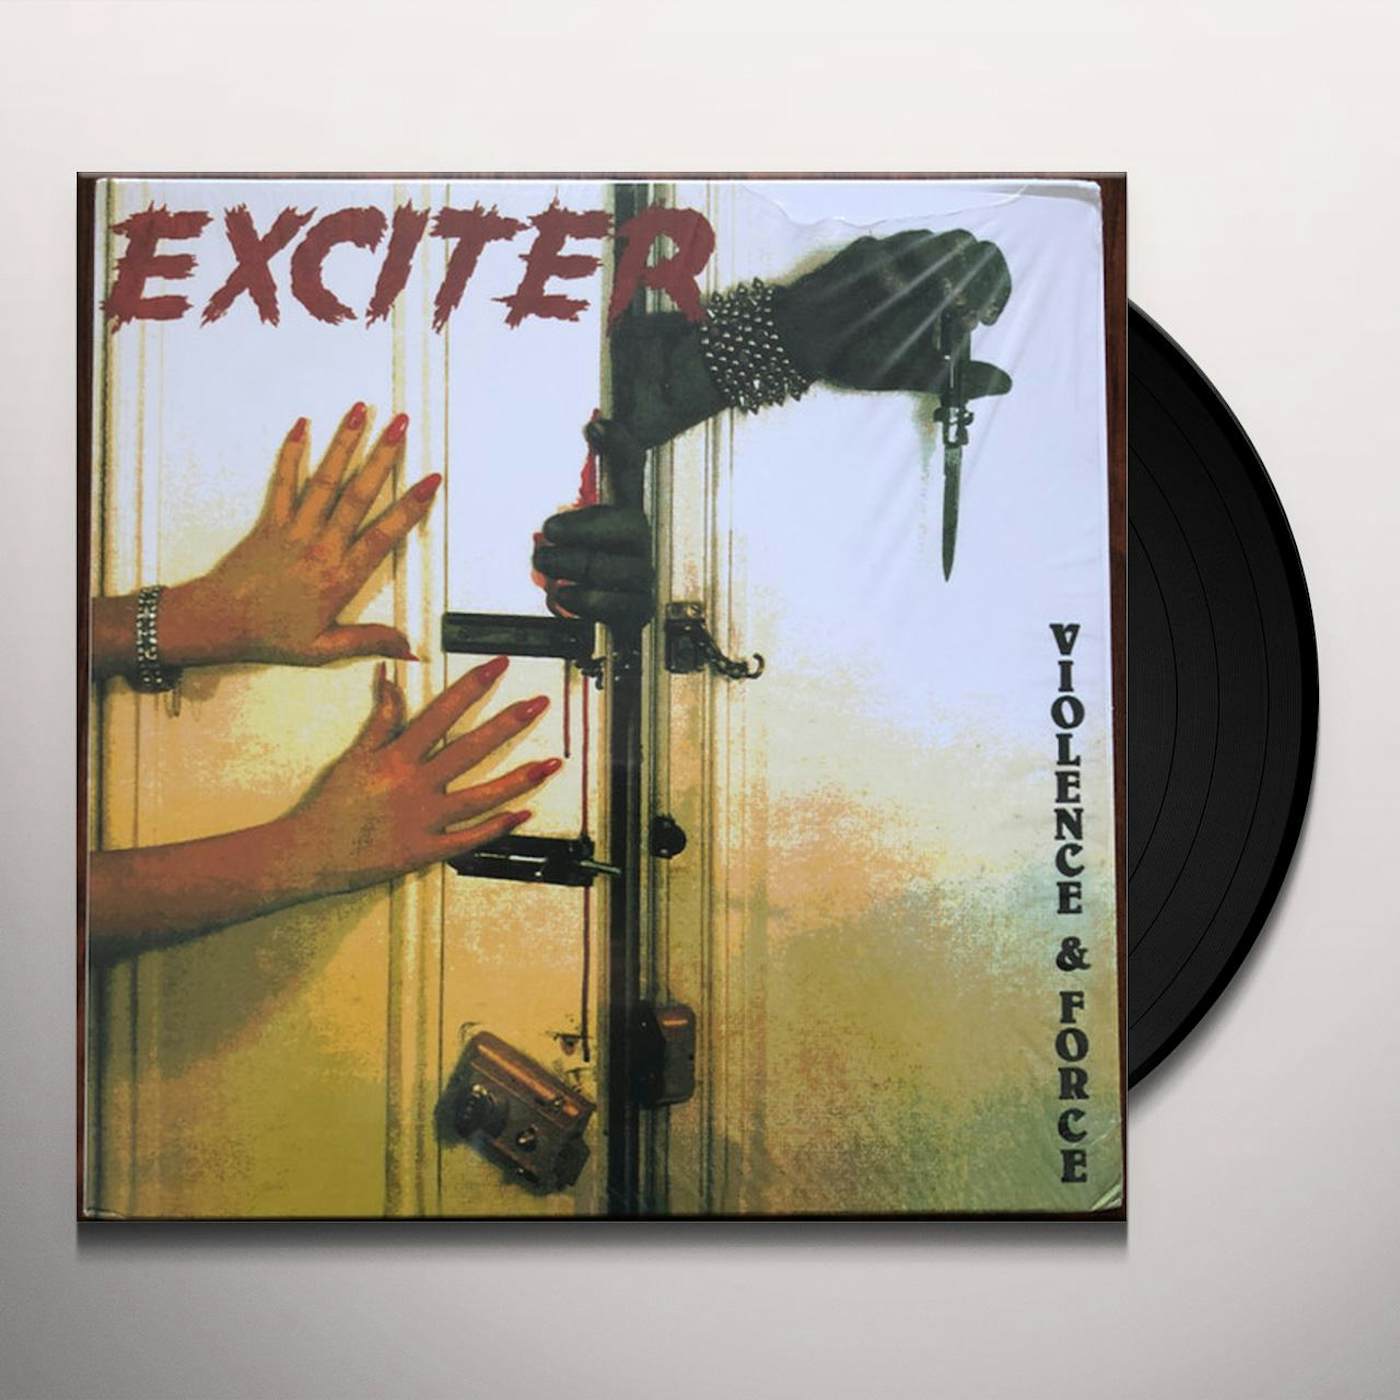 Exciter Violence & Force Vinyl Record